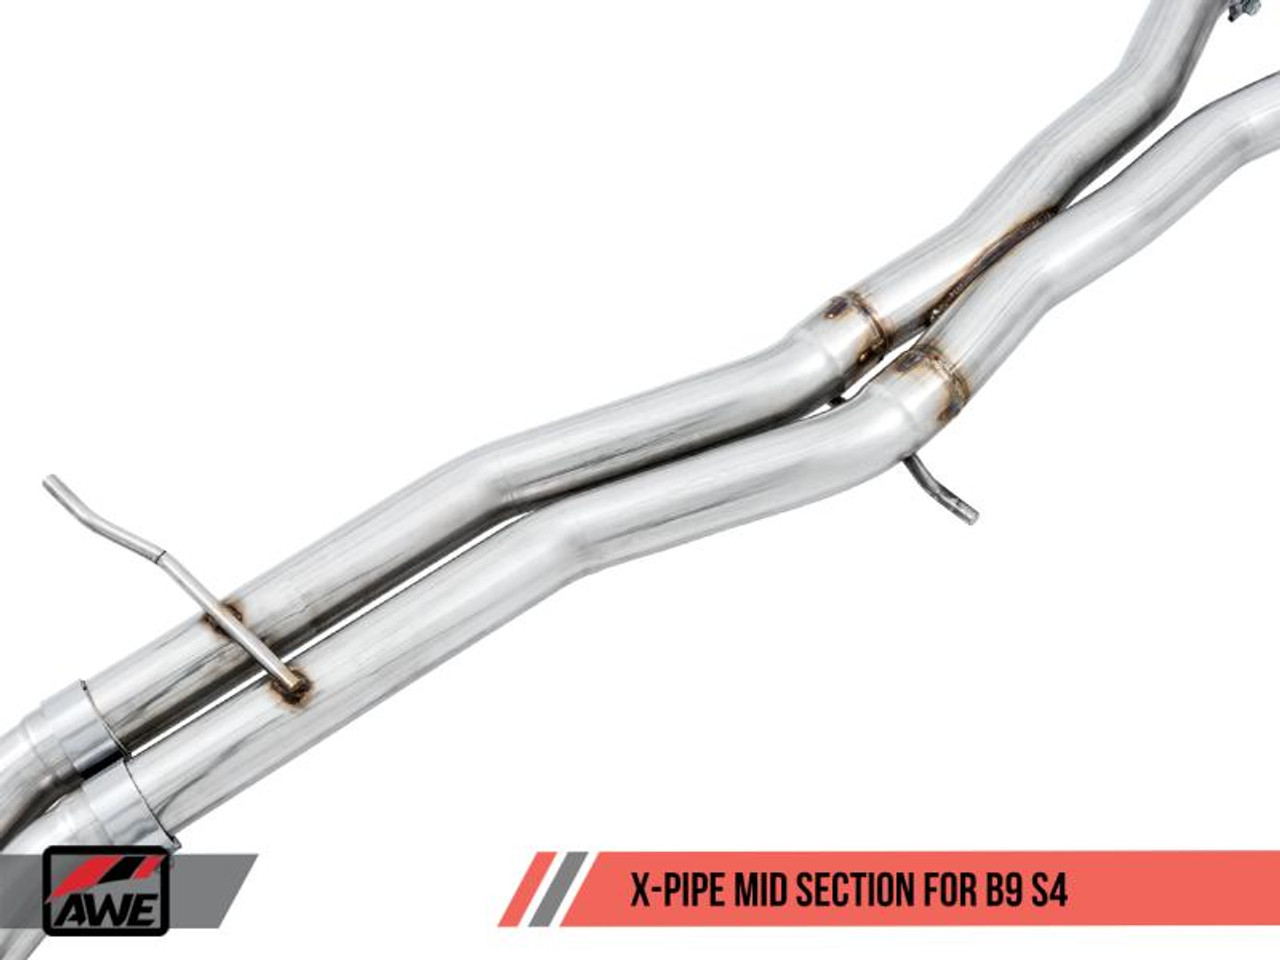 Awe Tuning AWE Tuning Audi B9 S4 SwitchPath Exhaust - Non-Resonated Silver 102mm Tips - 3025-42030